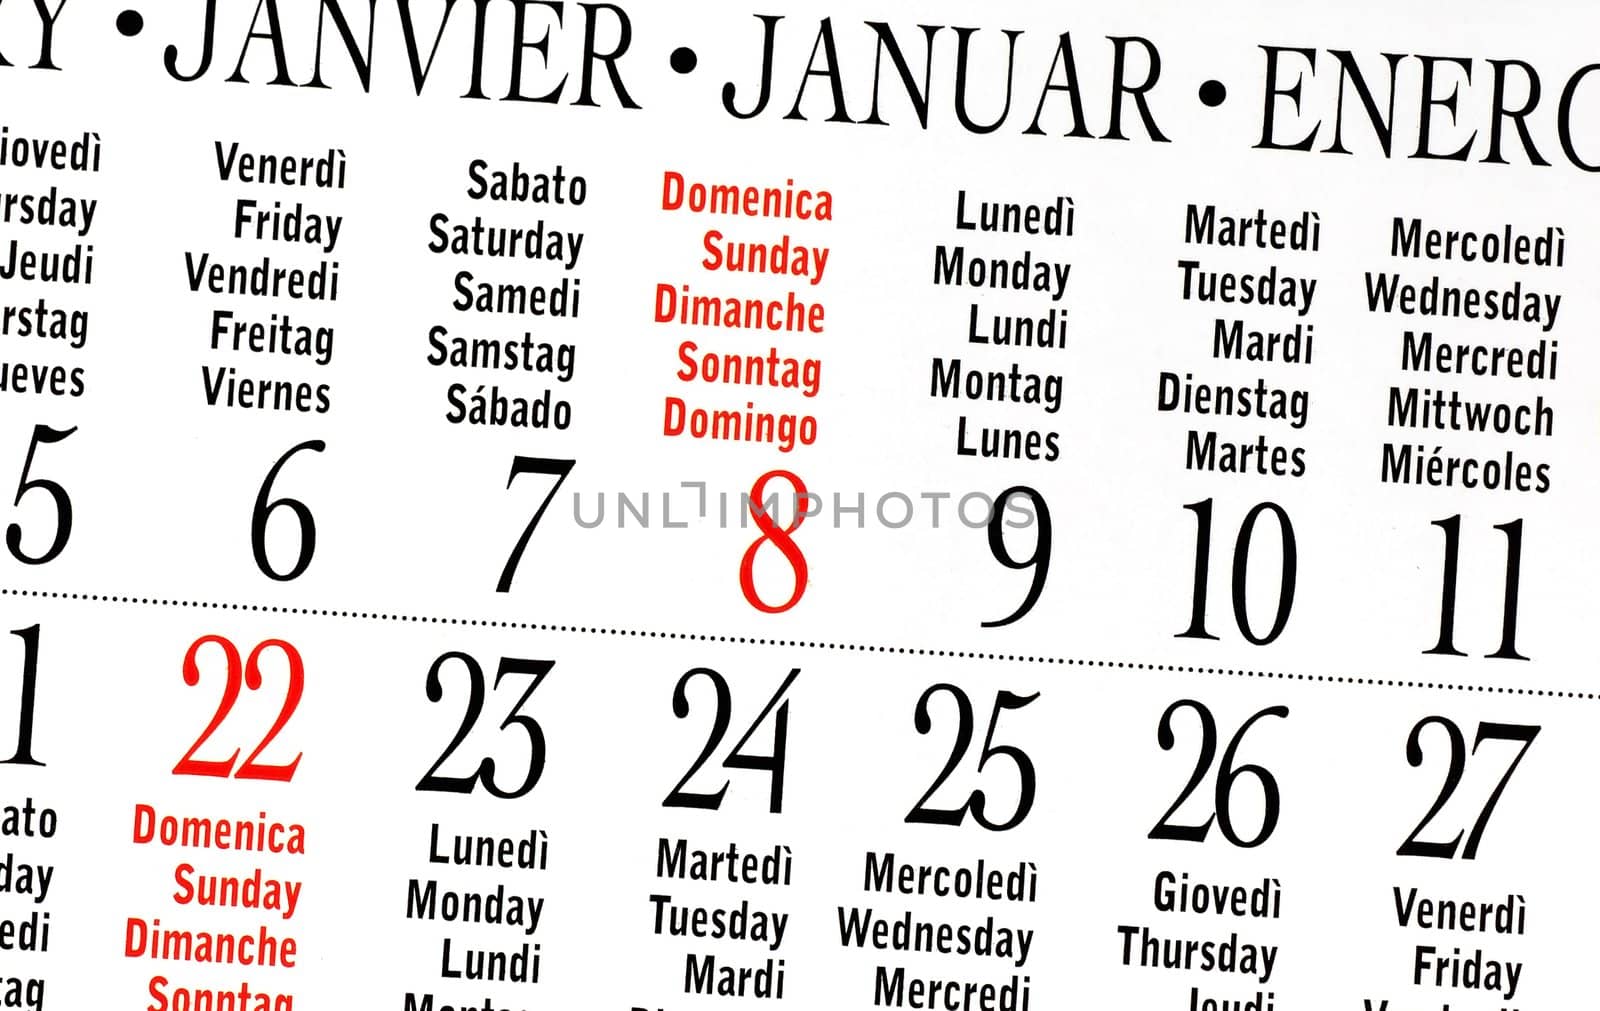 Calendar of January 2012 by simply